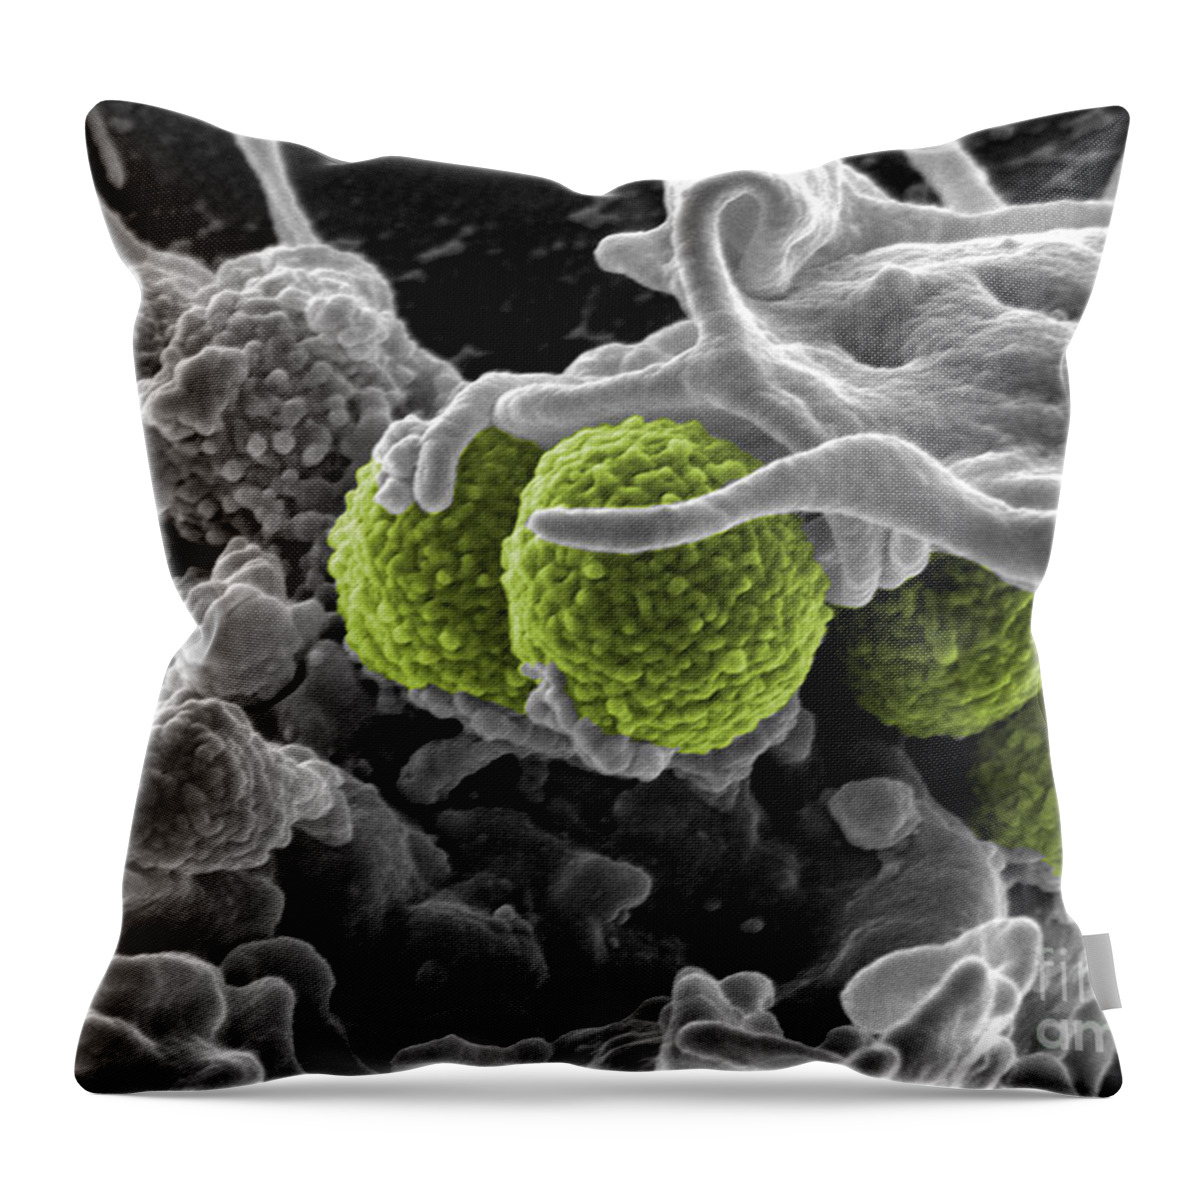 Microbiology Throw Pillow featuring the photograph Methicillin-resistant Staphylococcus by Science Source